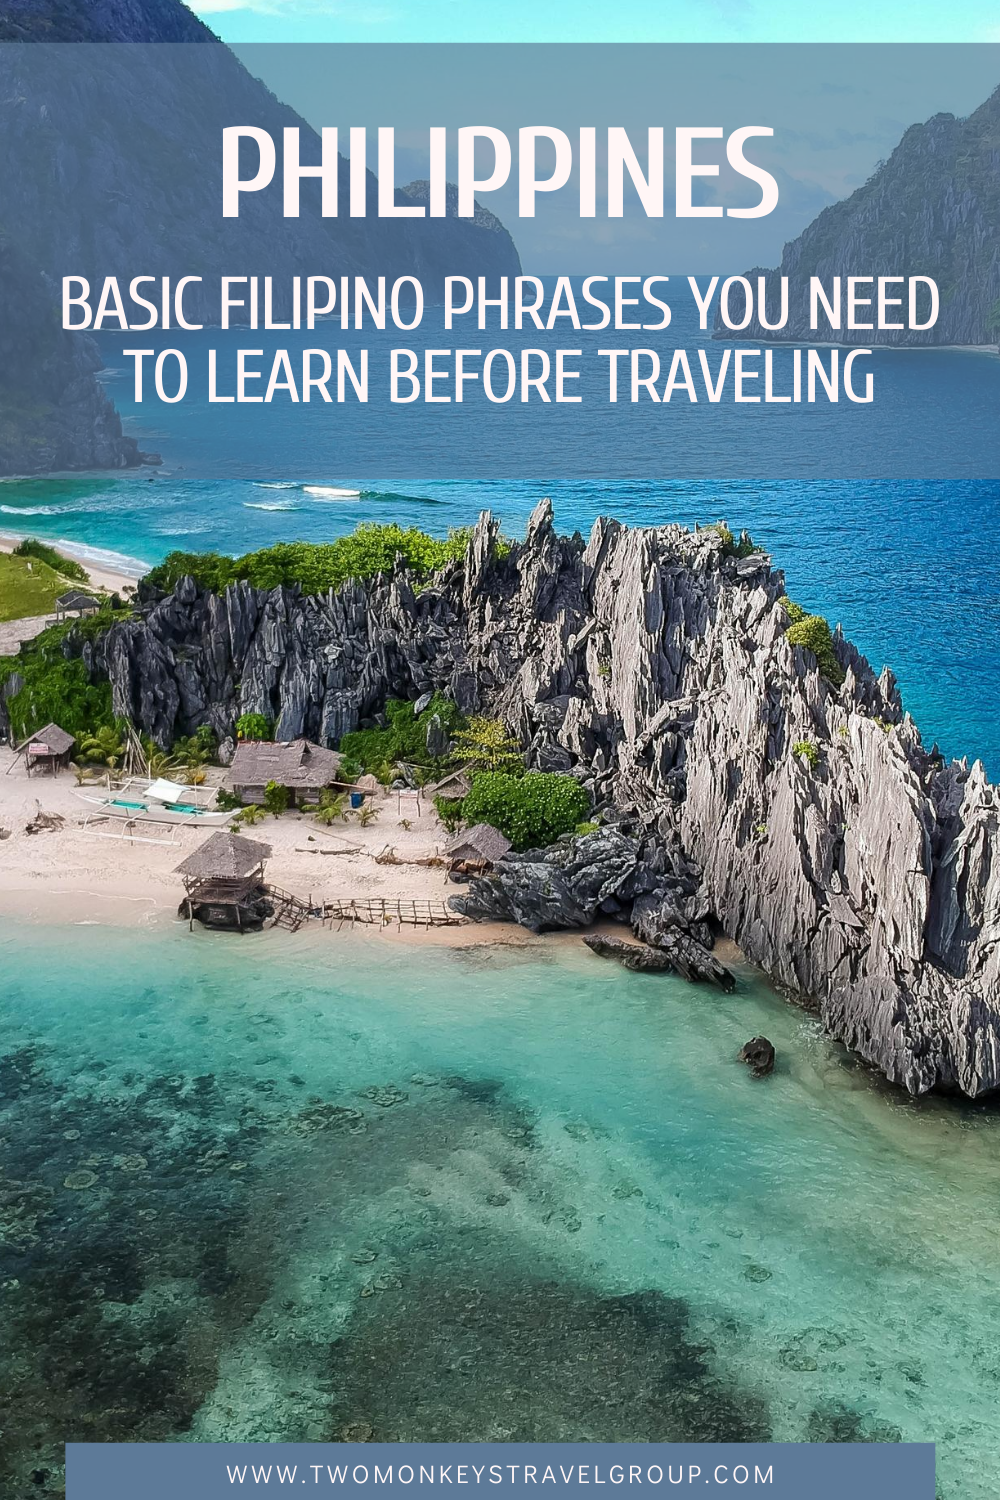 Basic Filipino Phrases You Need To Learn before Traveling to the Philippines